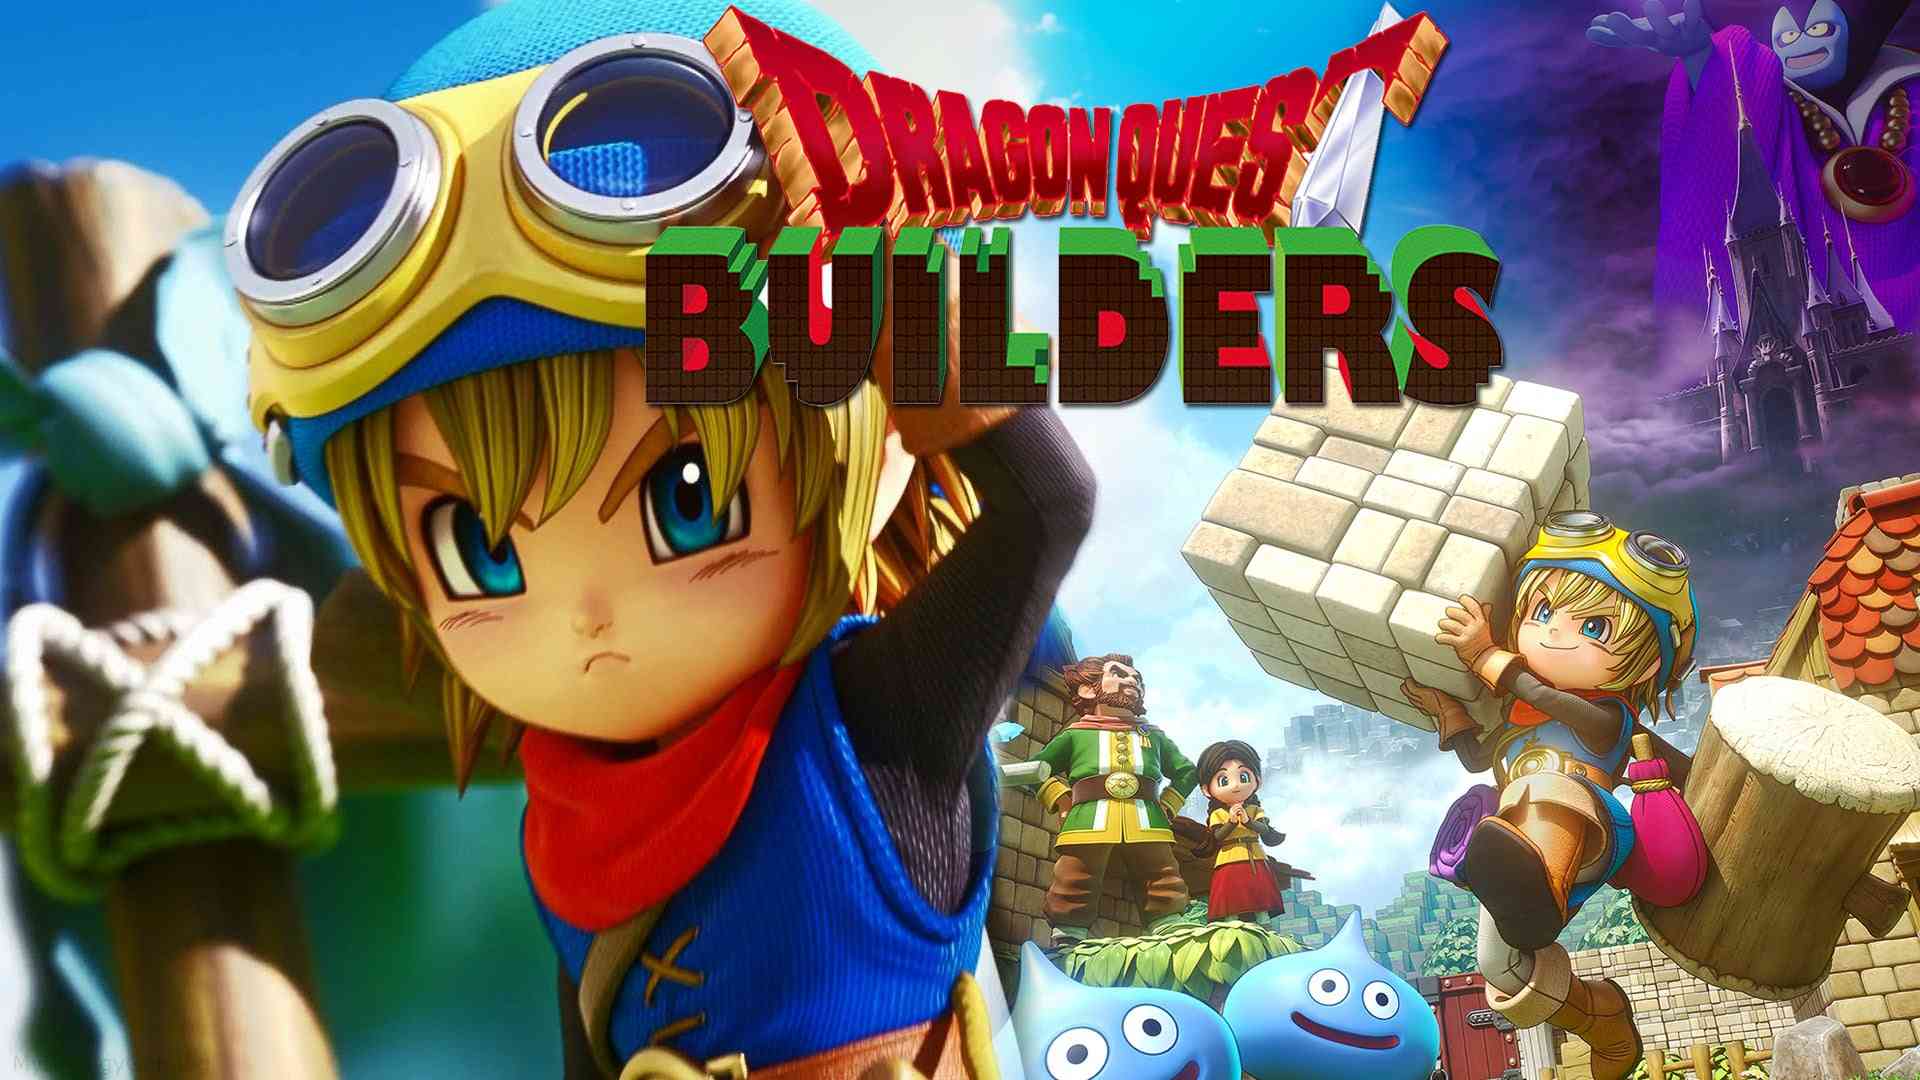 Dragon Quest Builders will be released on Steam on February 13